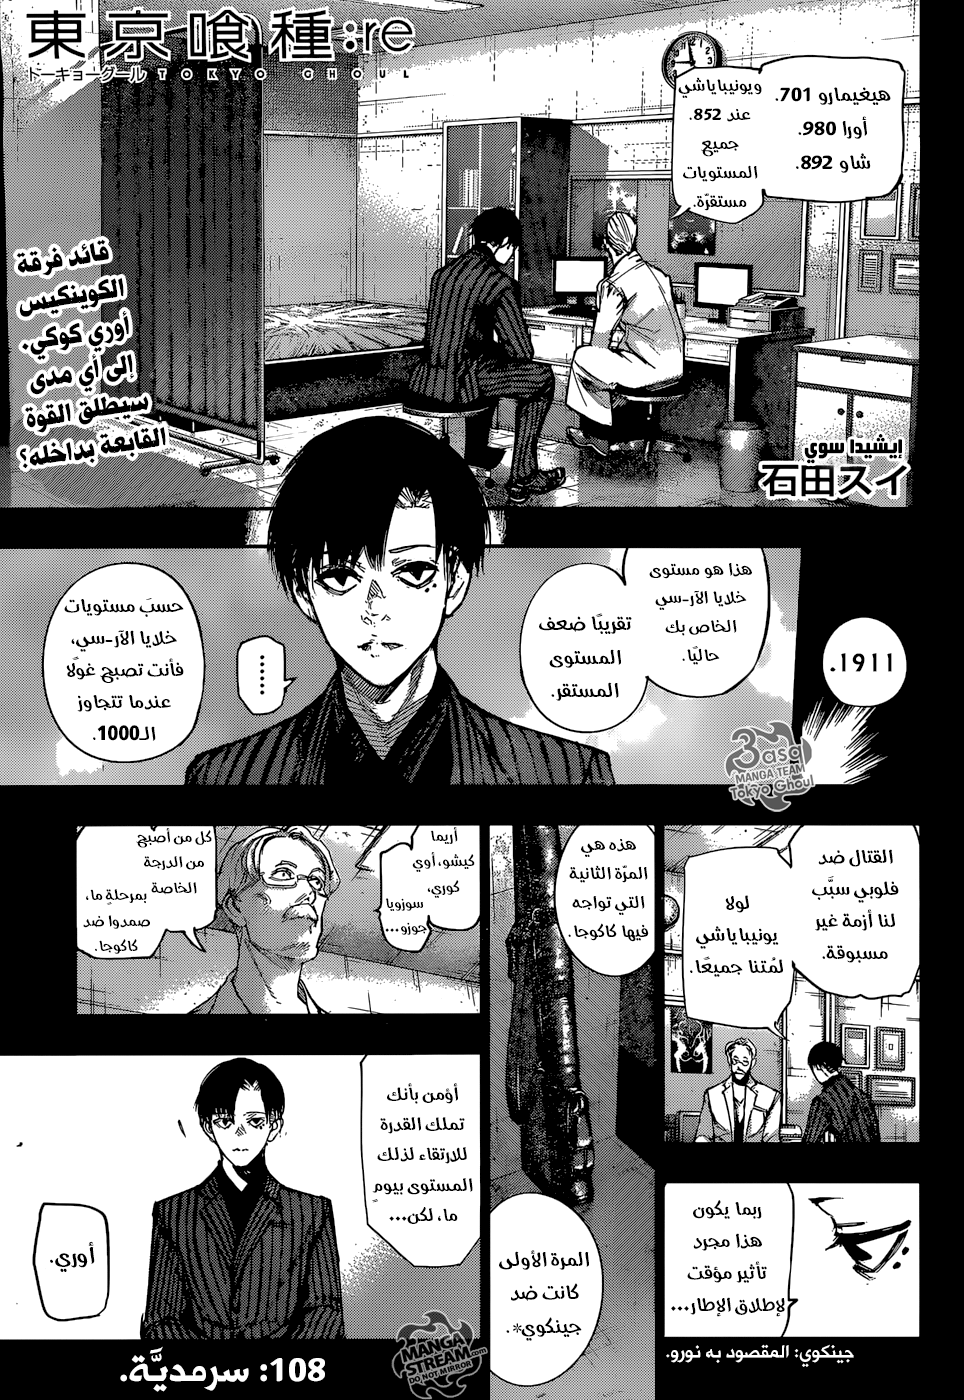 Tokyo Ghoul: Re: Chapter 108 - Page 1